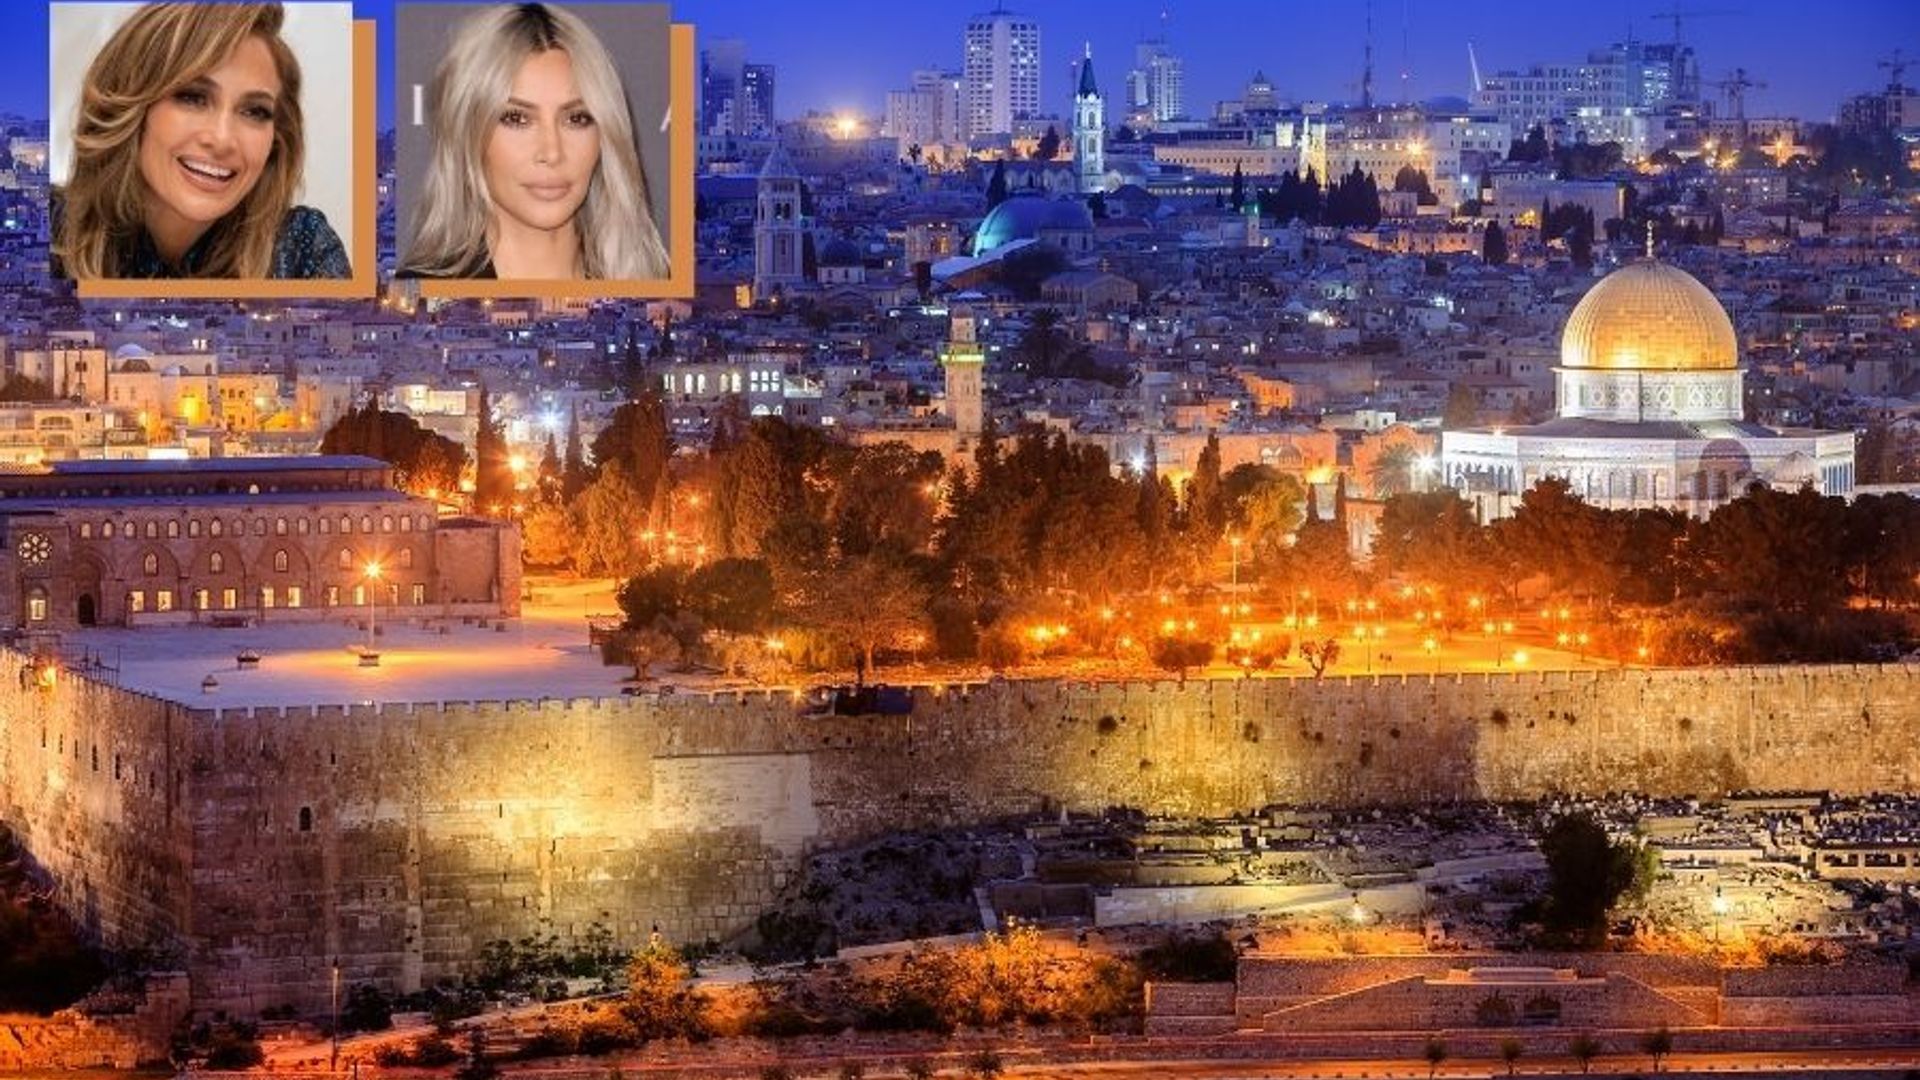 Star Escapes: Find out why celebs like Jennifer Lopez, Kim Kardashian and more are drawn to Jerusalem